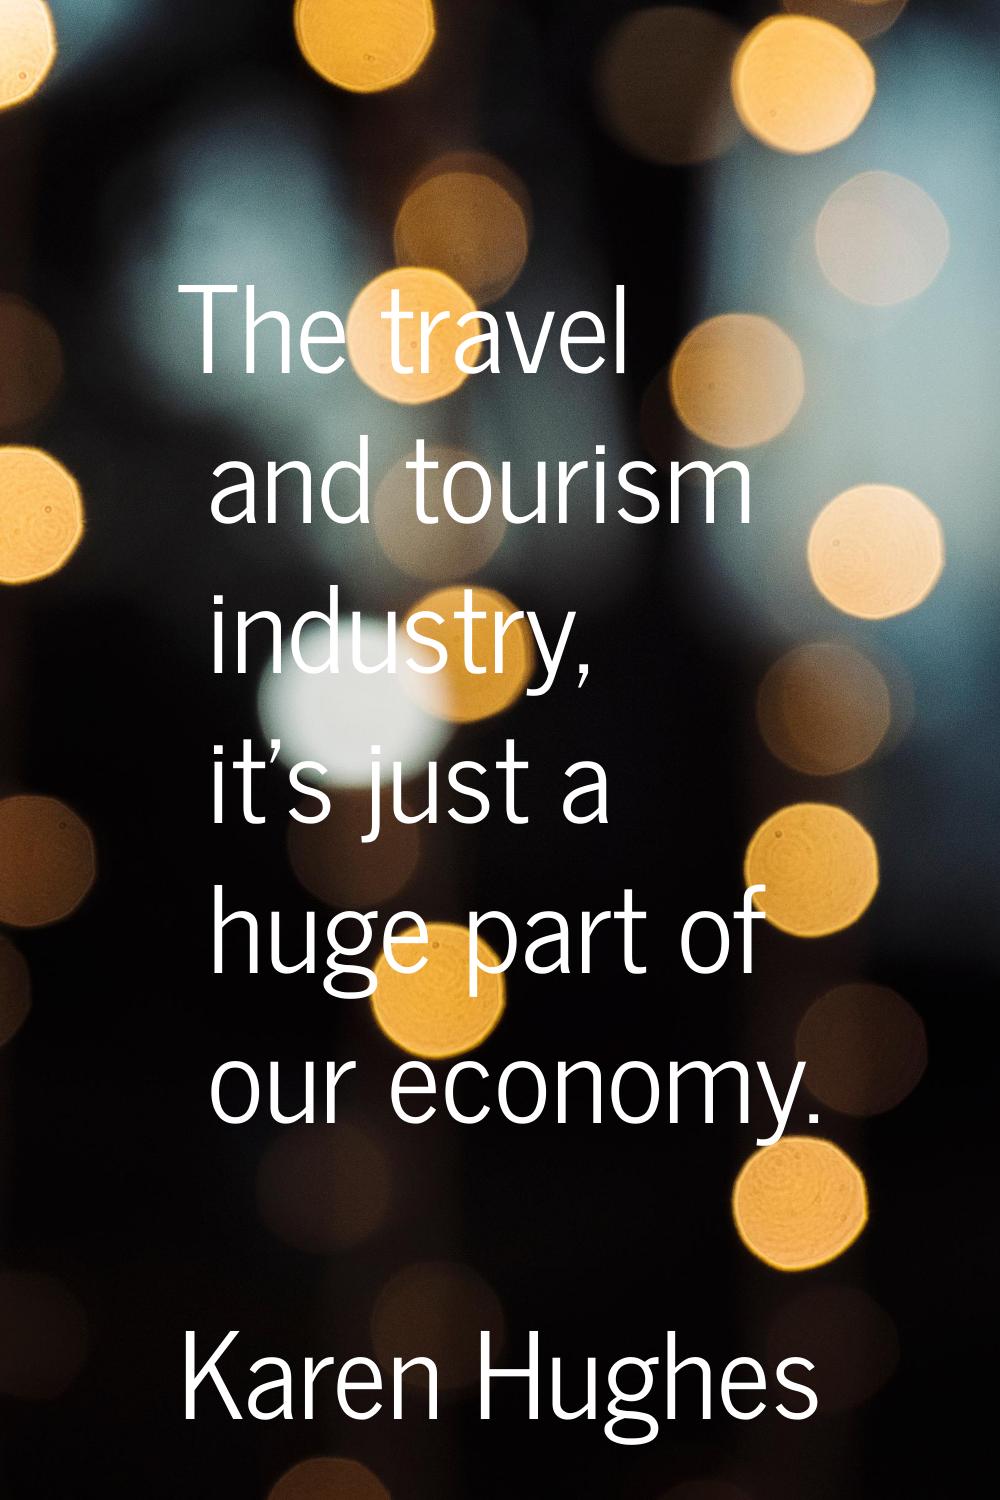 The travel and tourism industry, it's just a huge part of our economy.